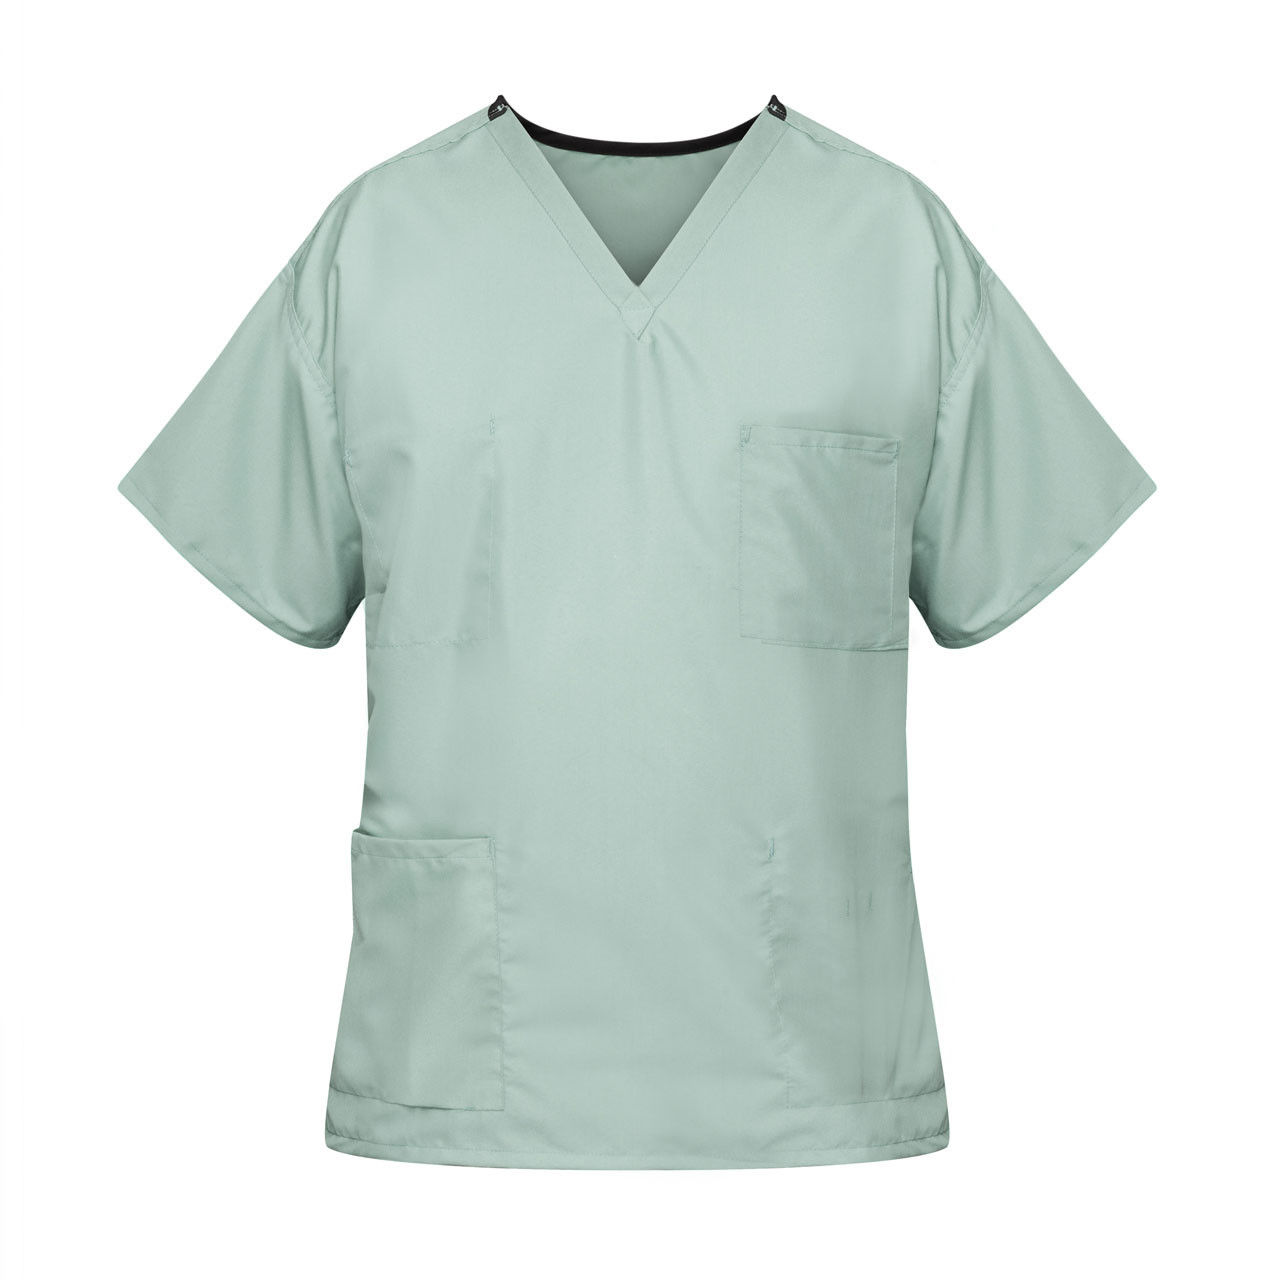 What is the method for determining the accurate size of misty green scrubs using measurements?